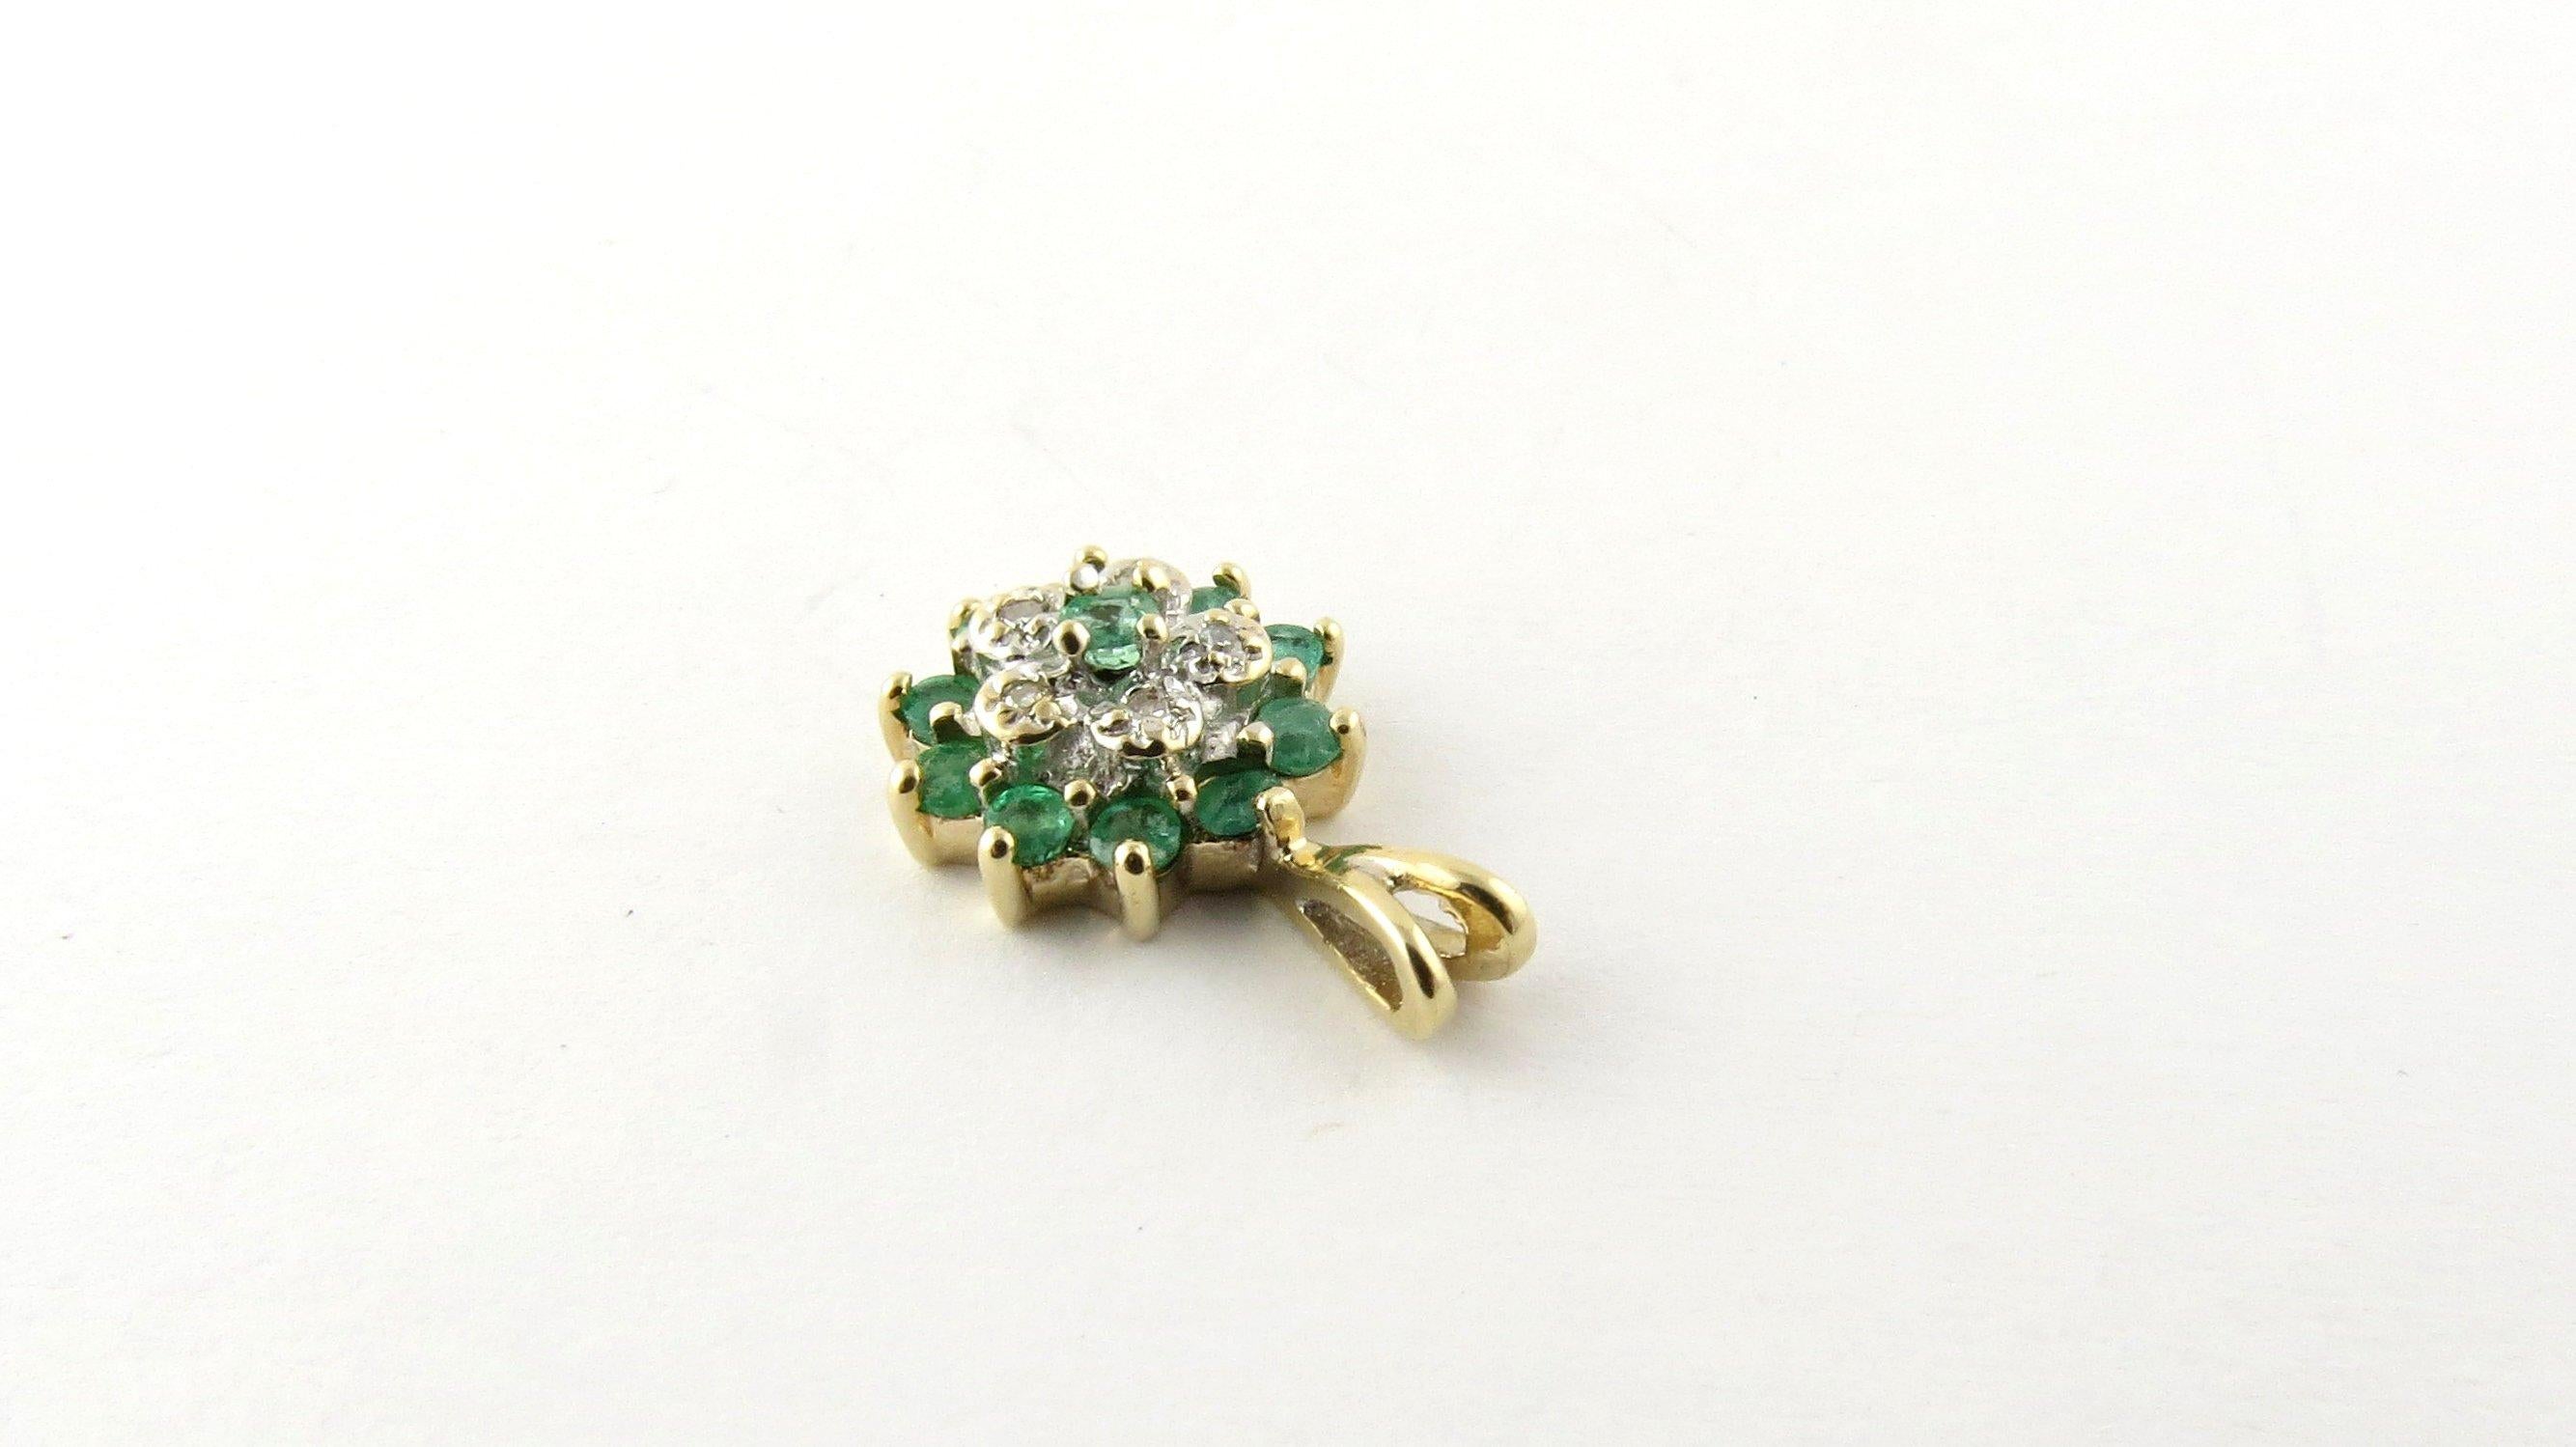 Vintage 14 Karat Yellow Gold Emerald and Diamond Pendant- This stunning pendant features 11 round emeralds and five round single cut diamonds set in classic 14K yellow gold. Approximate total diamond weight: .025 ct. Diamond color: J Diamond